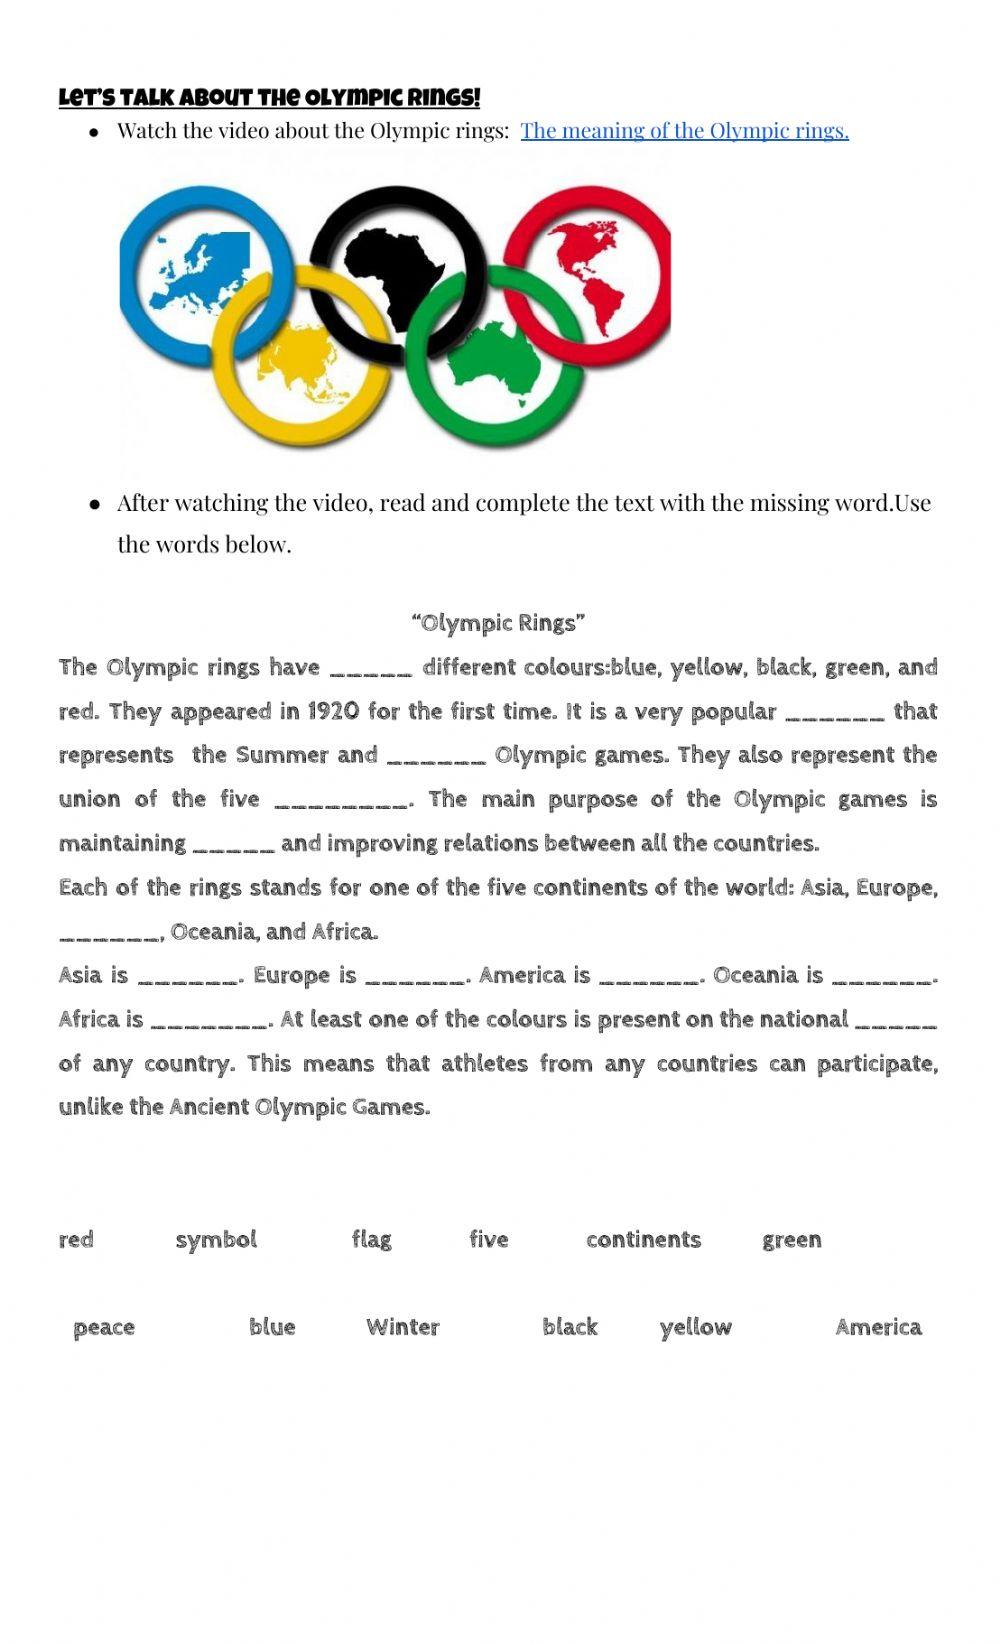 The Colors of the Olympic Rings - Scuffy Blog by Scuffmaster